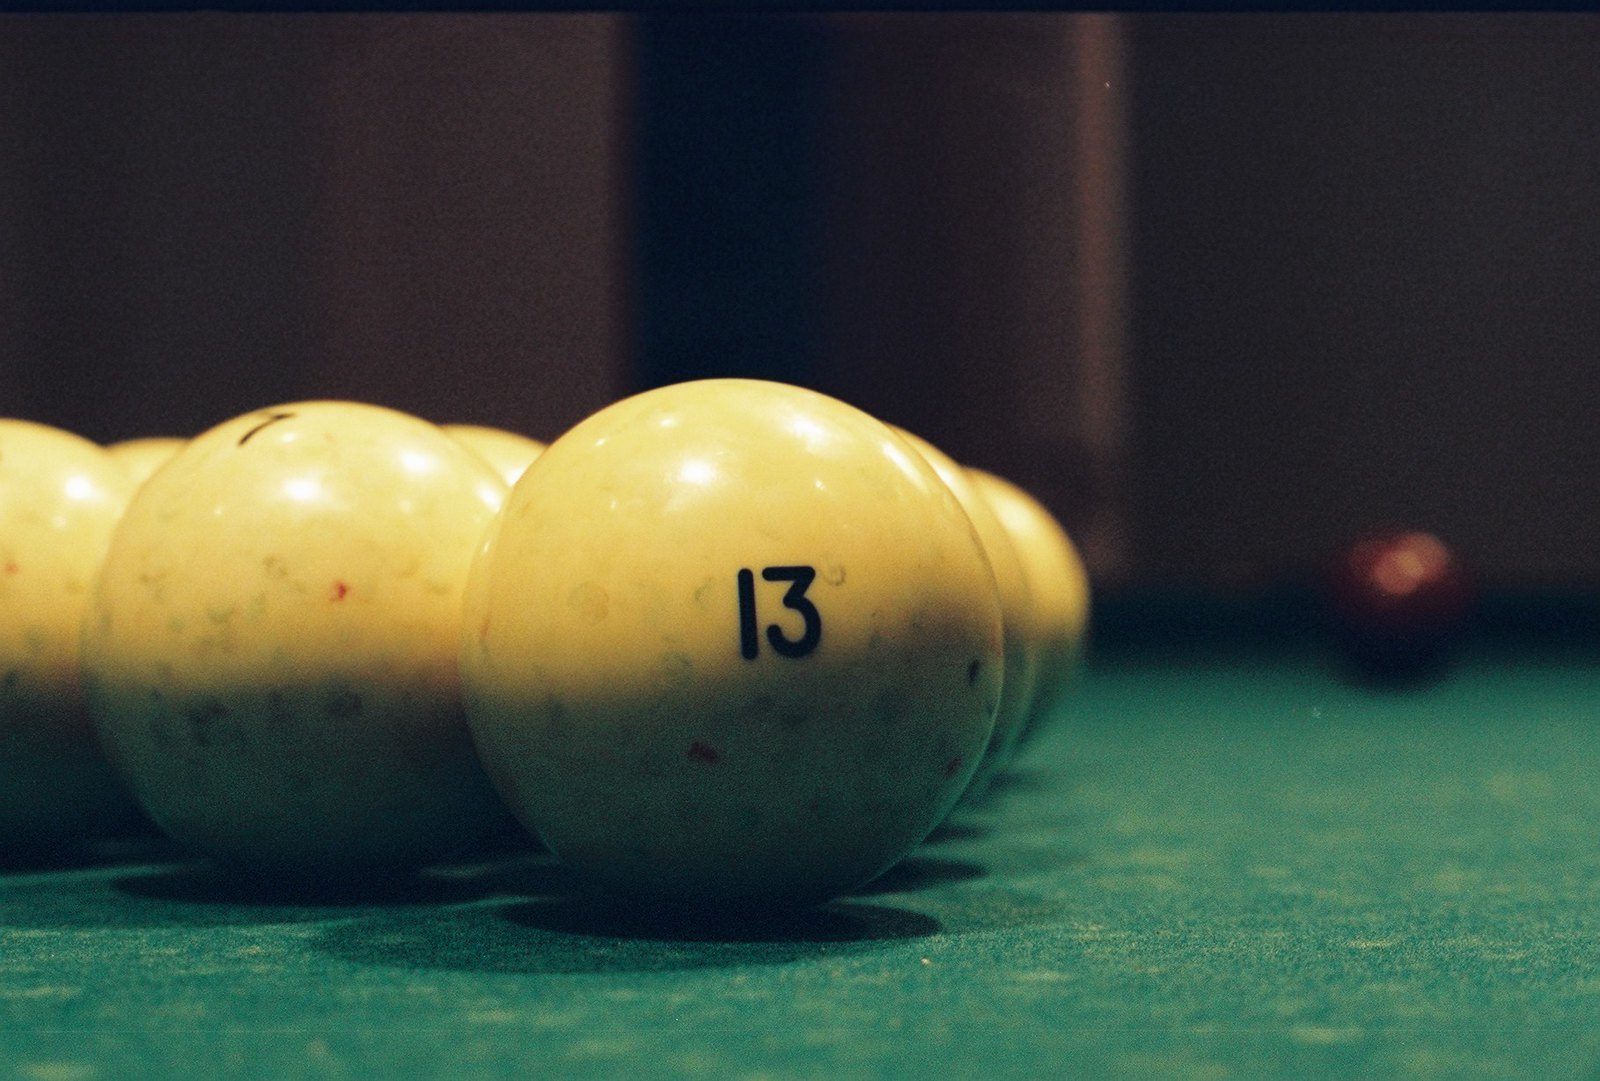 Billiards balls on a billiards table. In the foreground is a while ball showing the number 13.